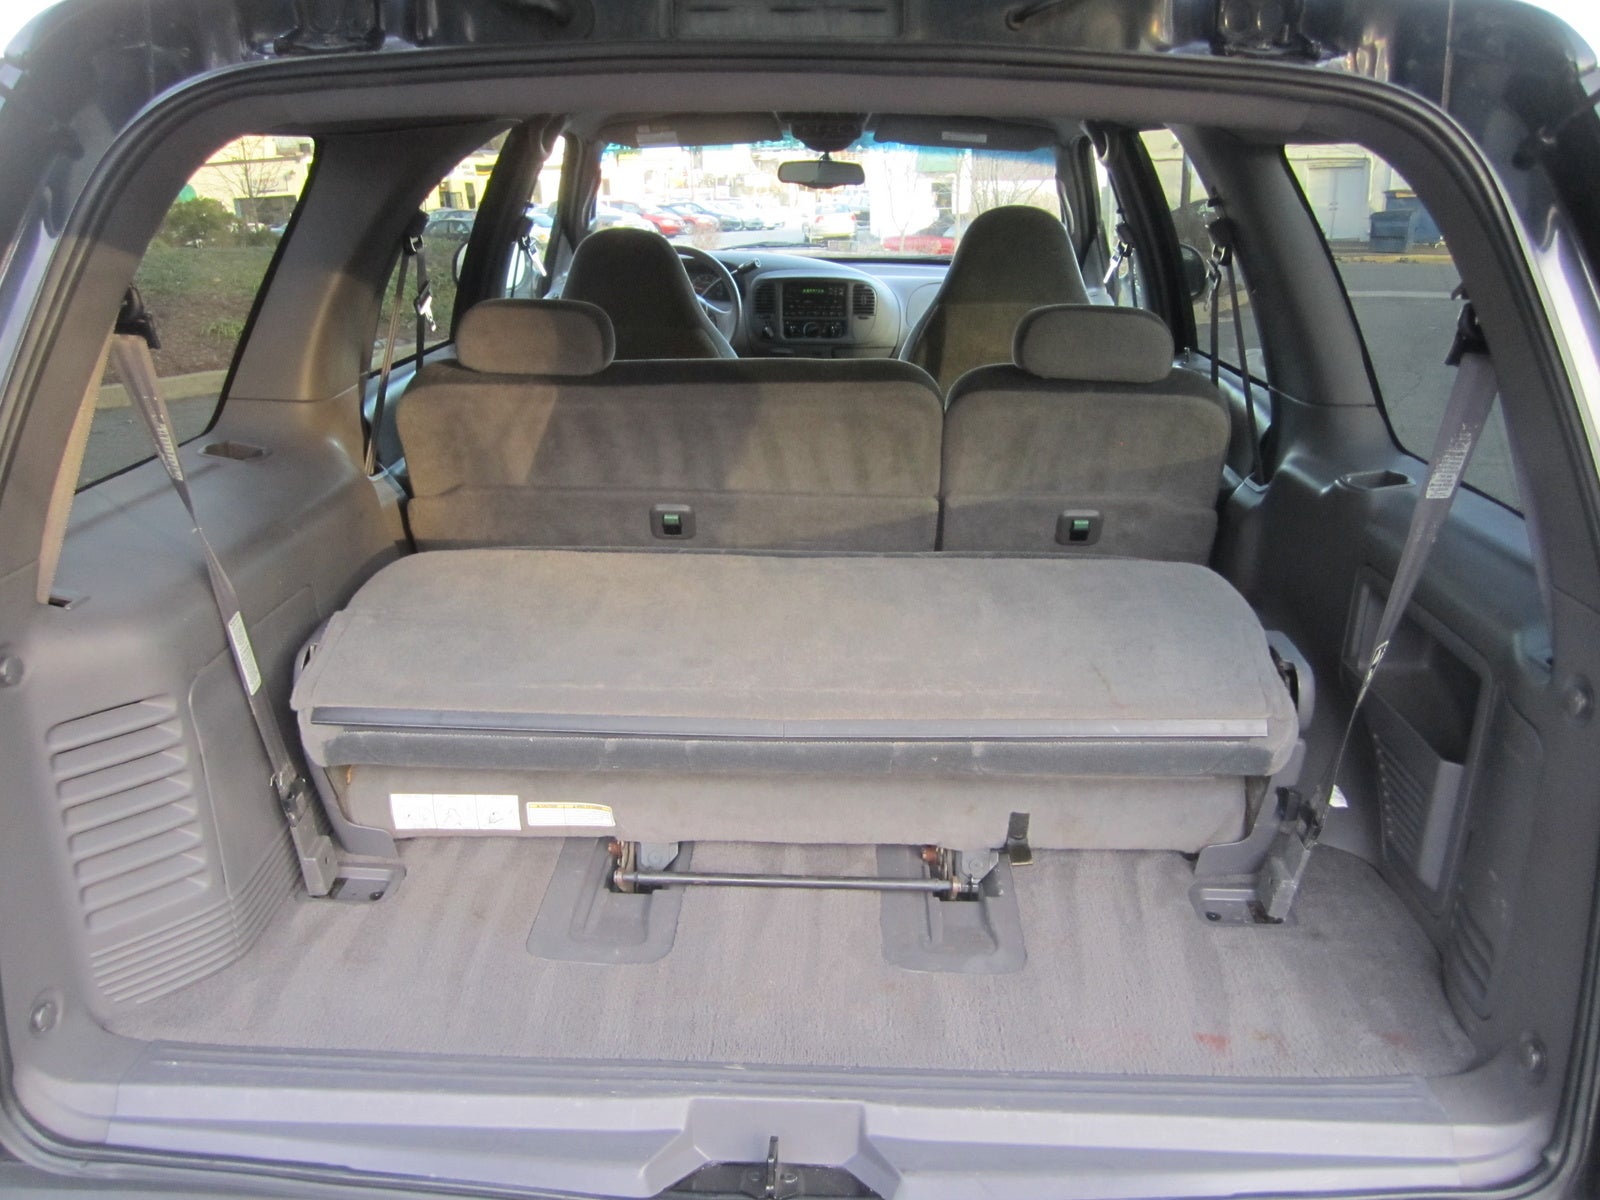 2000 Ford expedition interior dimensions #4